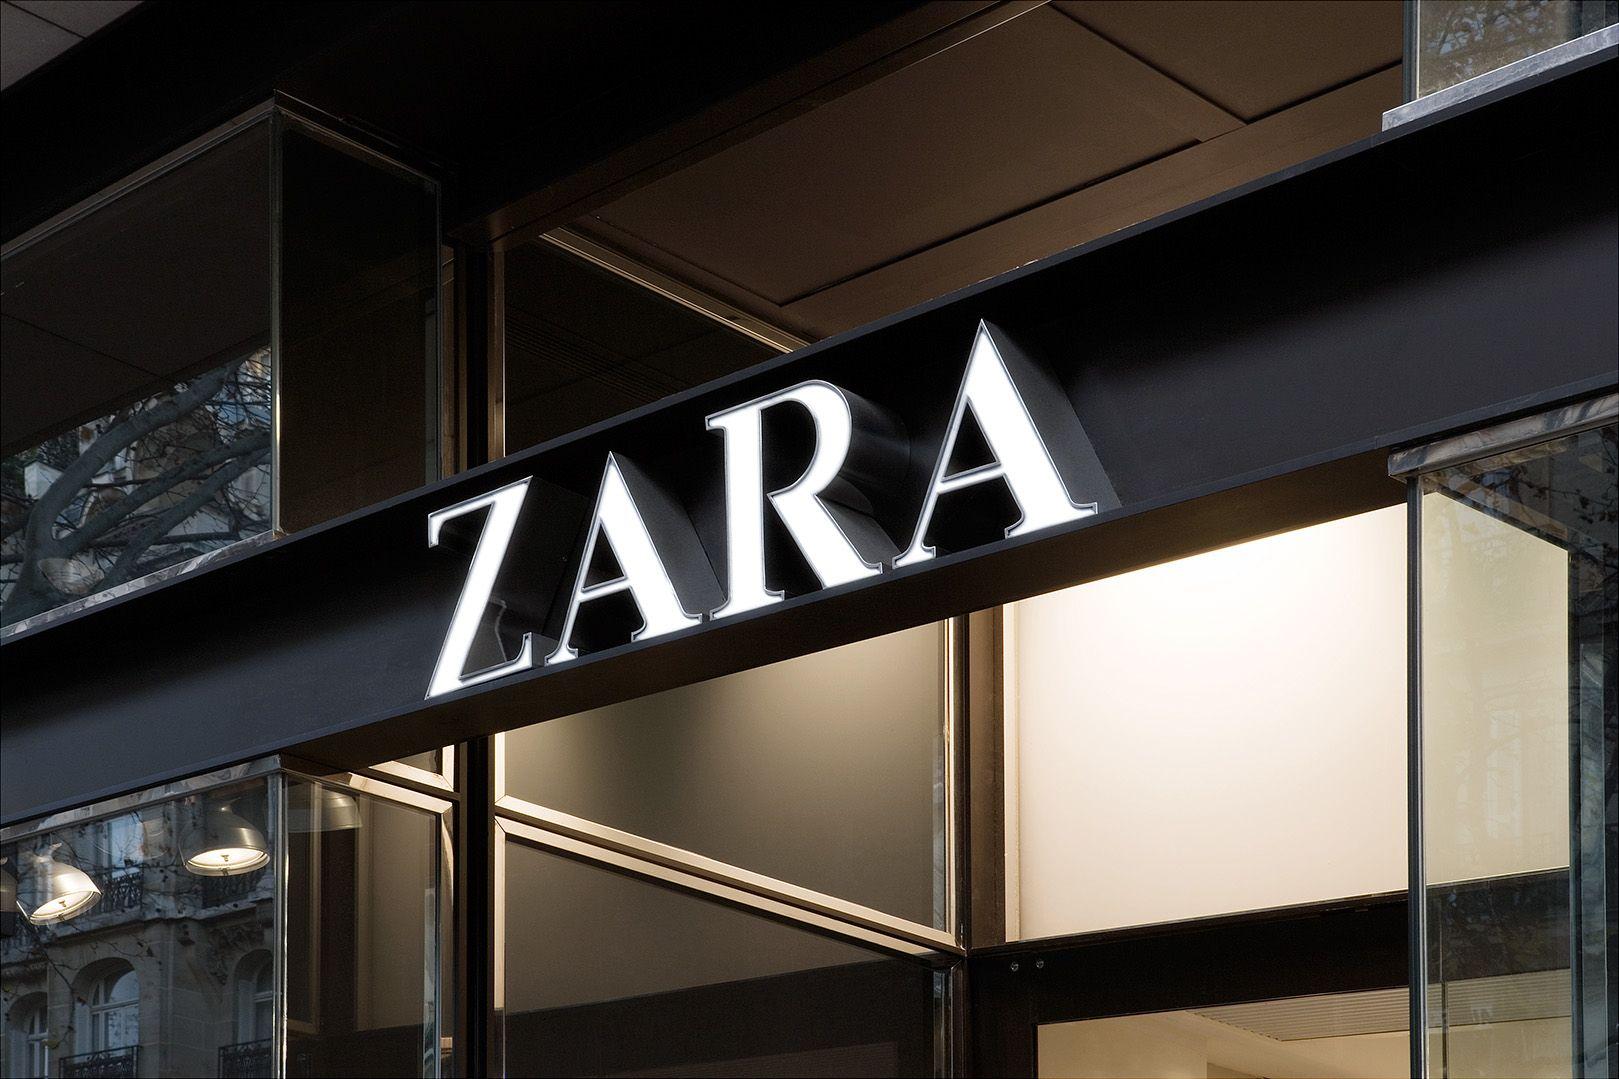 The Zara's 0$ Advertising Strategy And Why It Succeeds